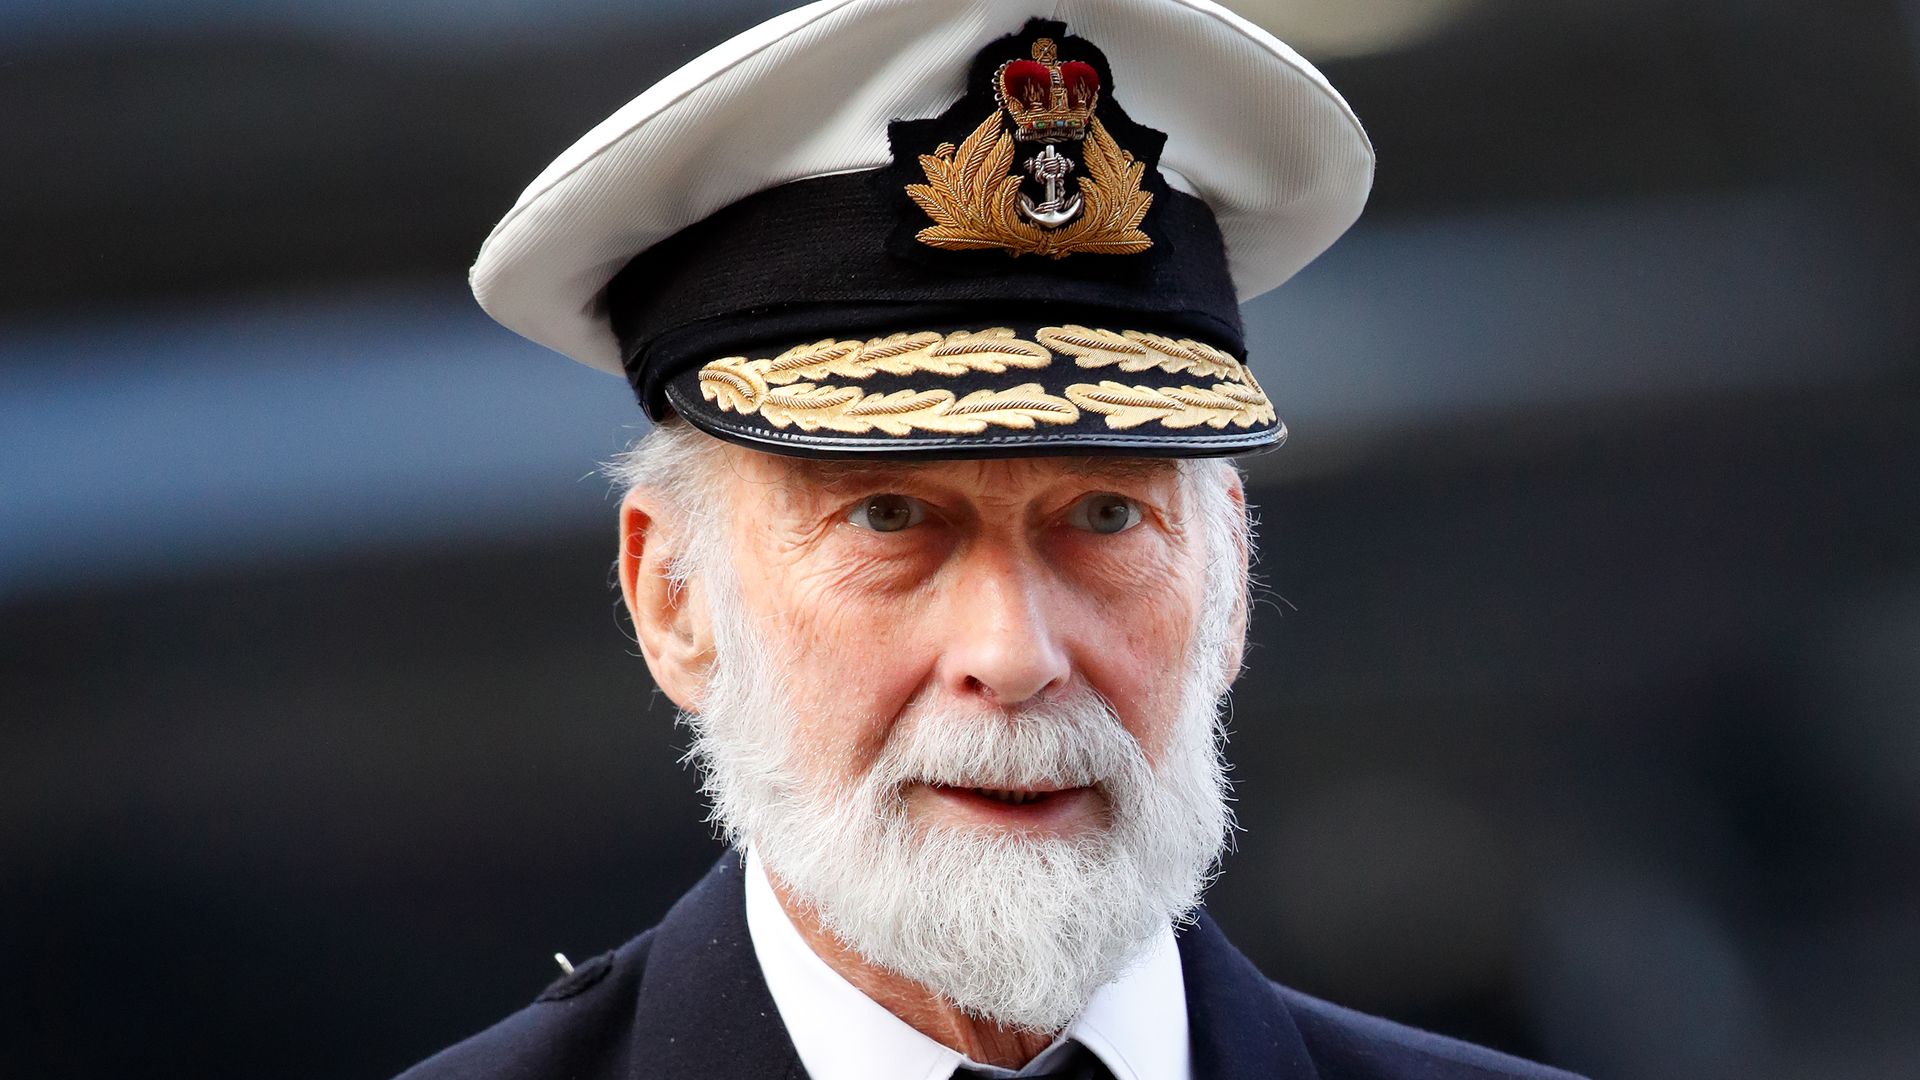 Prince Michael of Kent attends a Service of Thanksgiving for the life and work of Sir Donald Gosling at Westminster Abbey on December 11, 2019